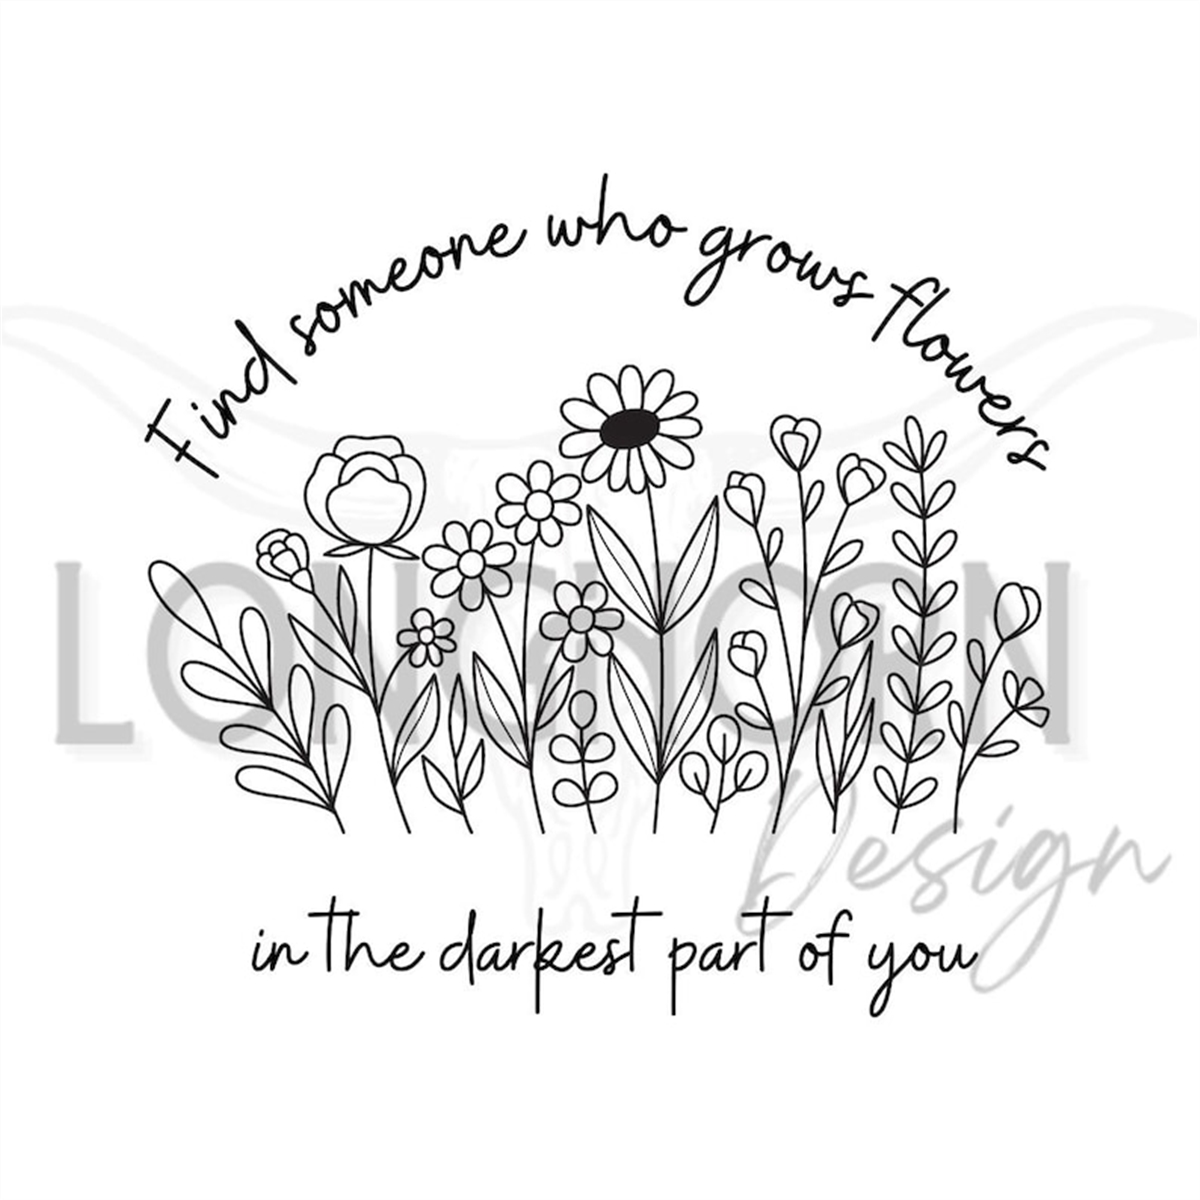 find-someone-who-grows-flowers-in-the-darkest-part-of-you-svg-image-1